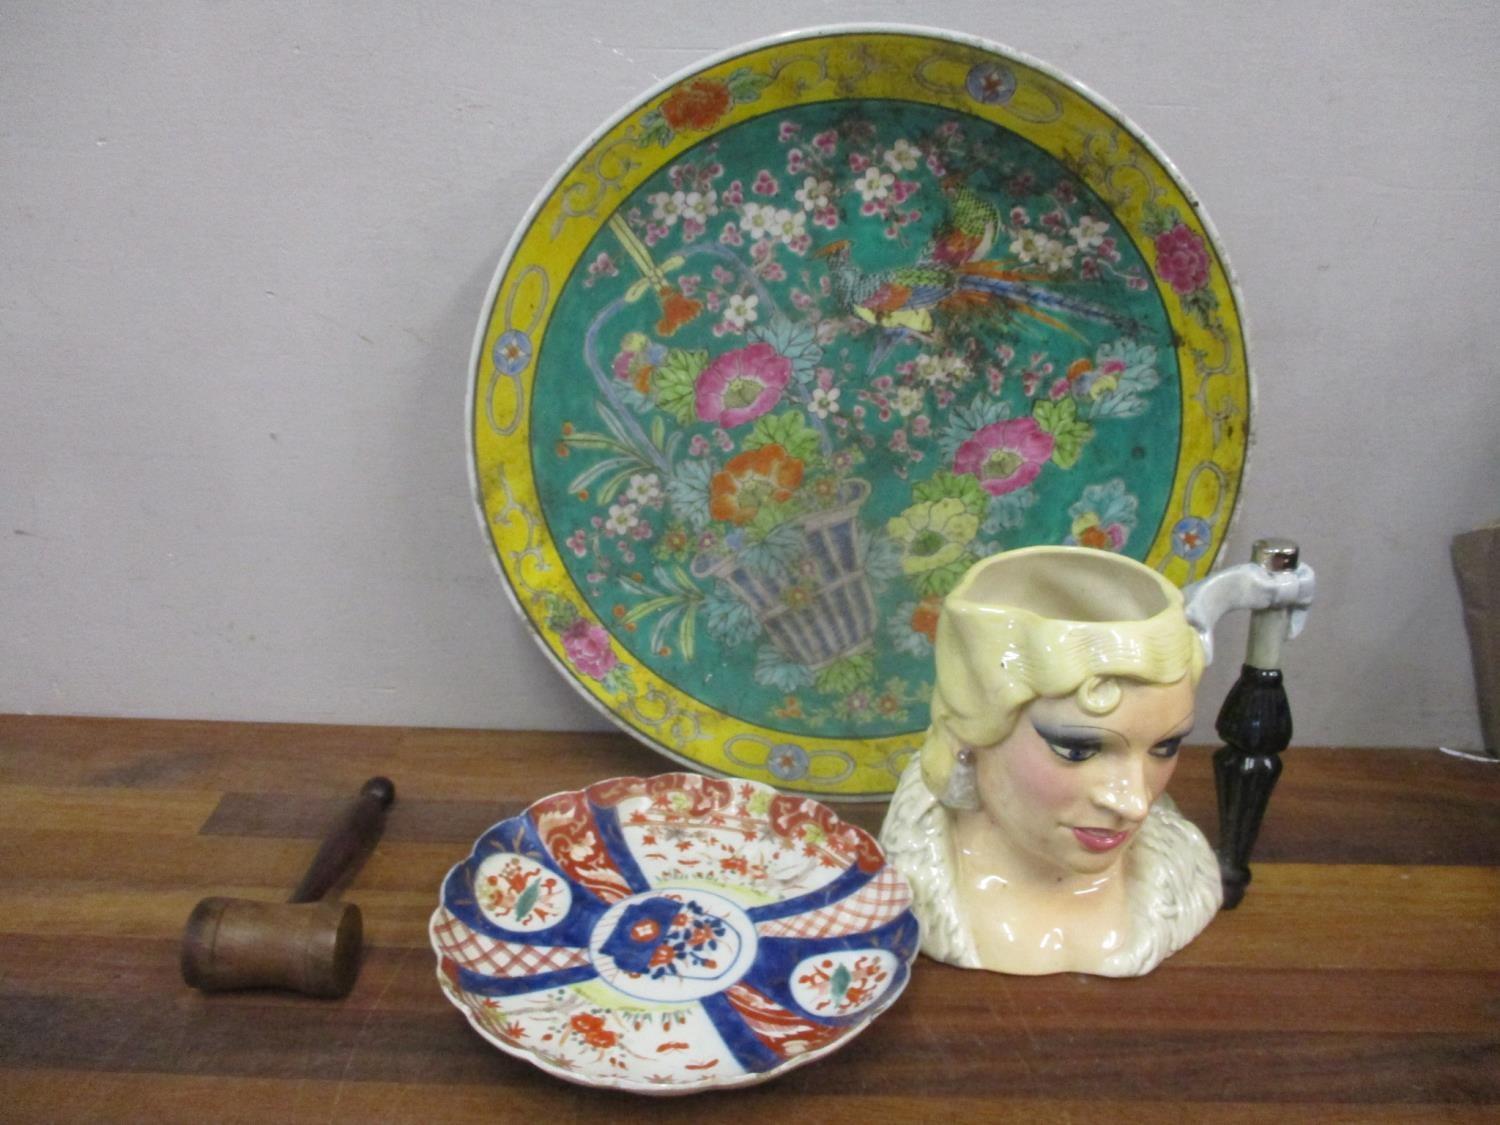 Japanese porcelain wall chargers, a pottery character jug and a wooden gavel